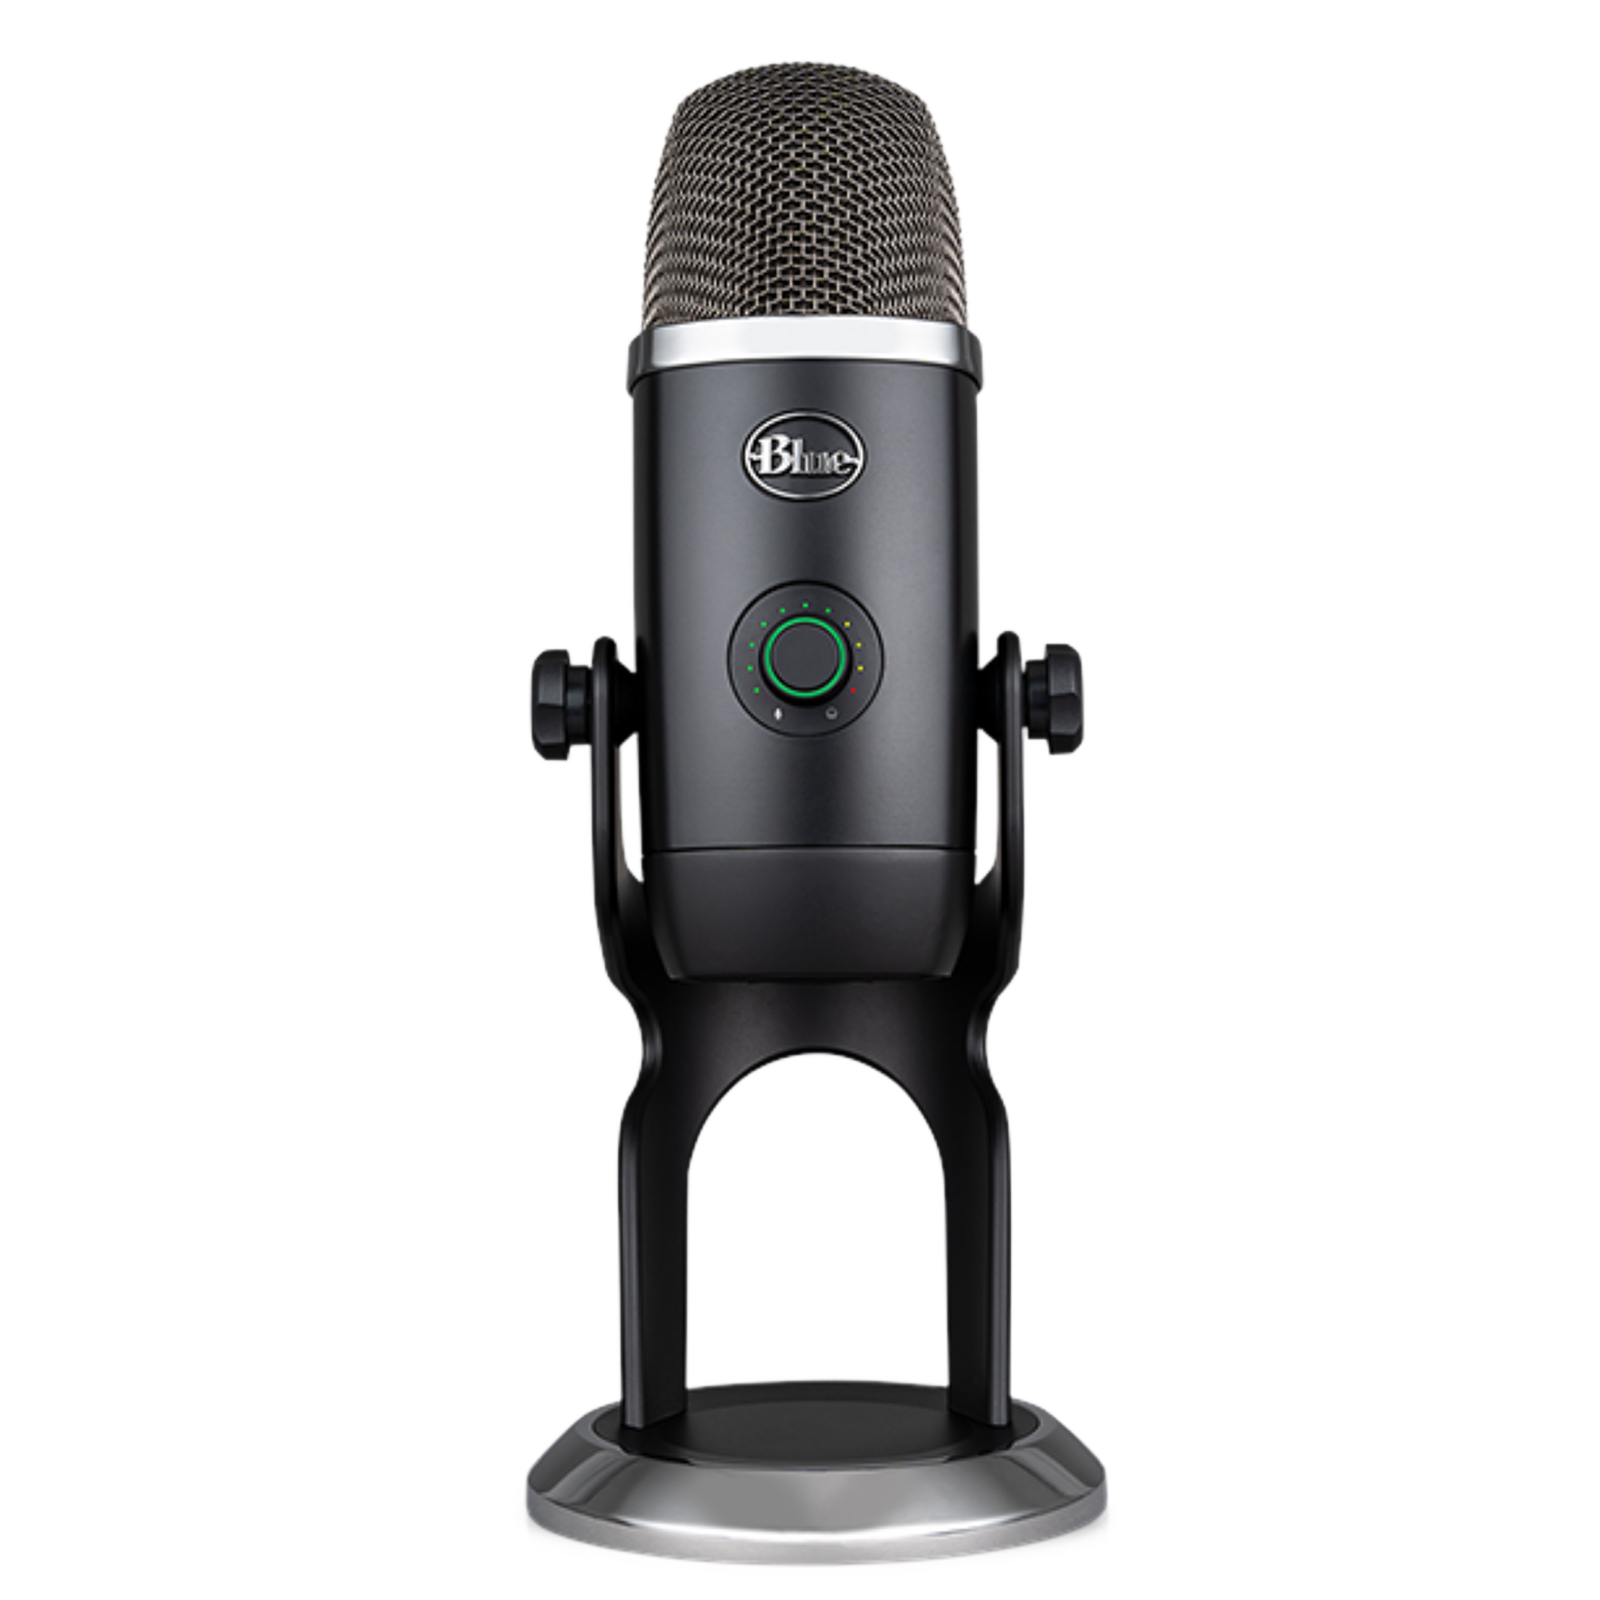 The Yeti Classic is a Monster of a USB Microphone That Won't Break